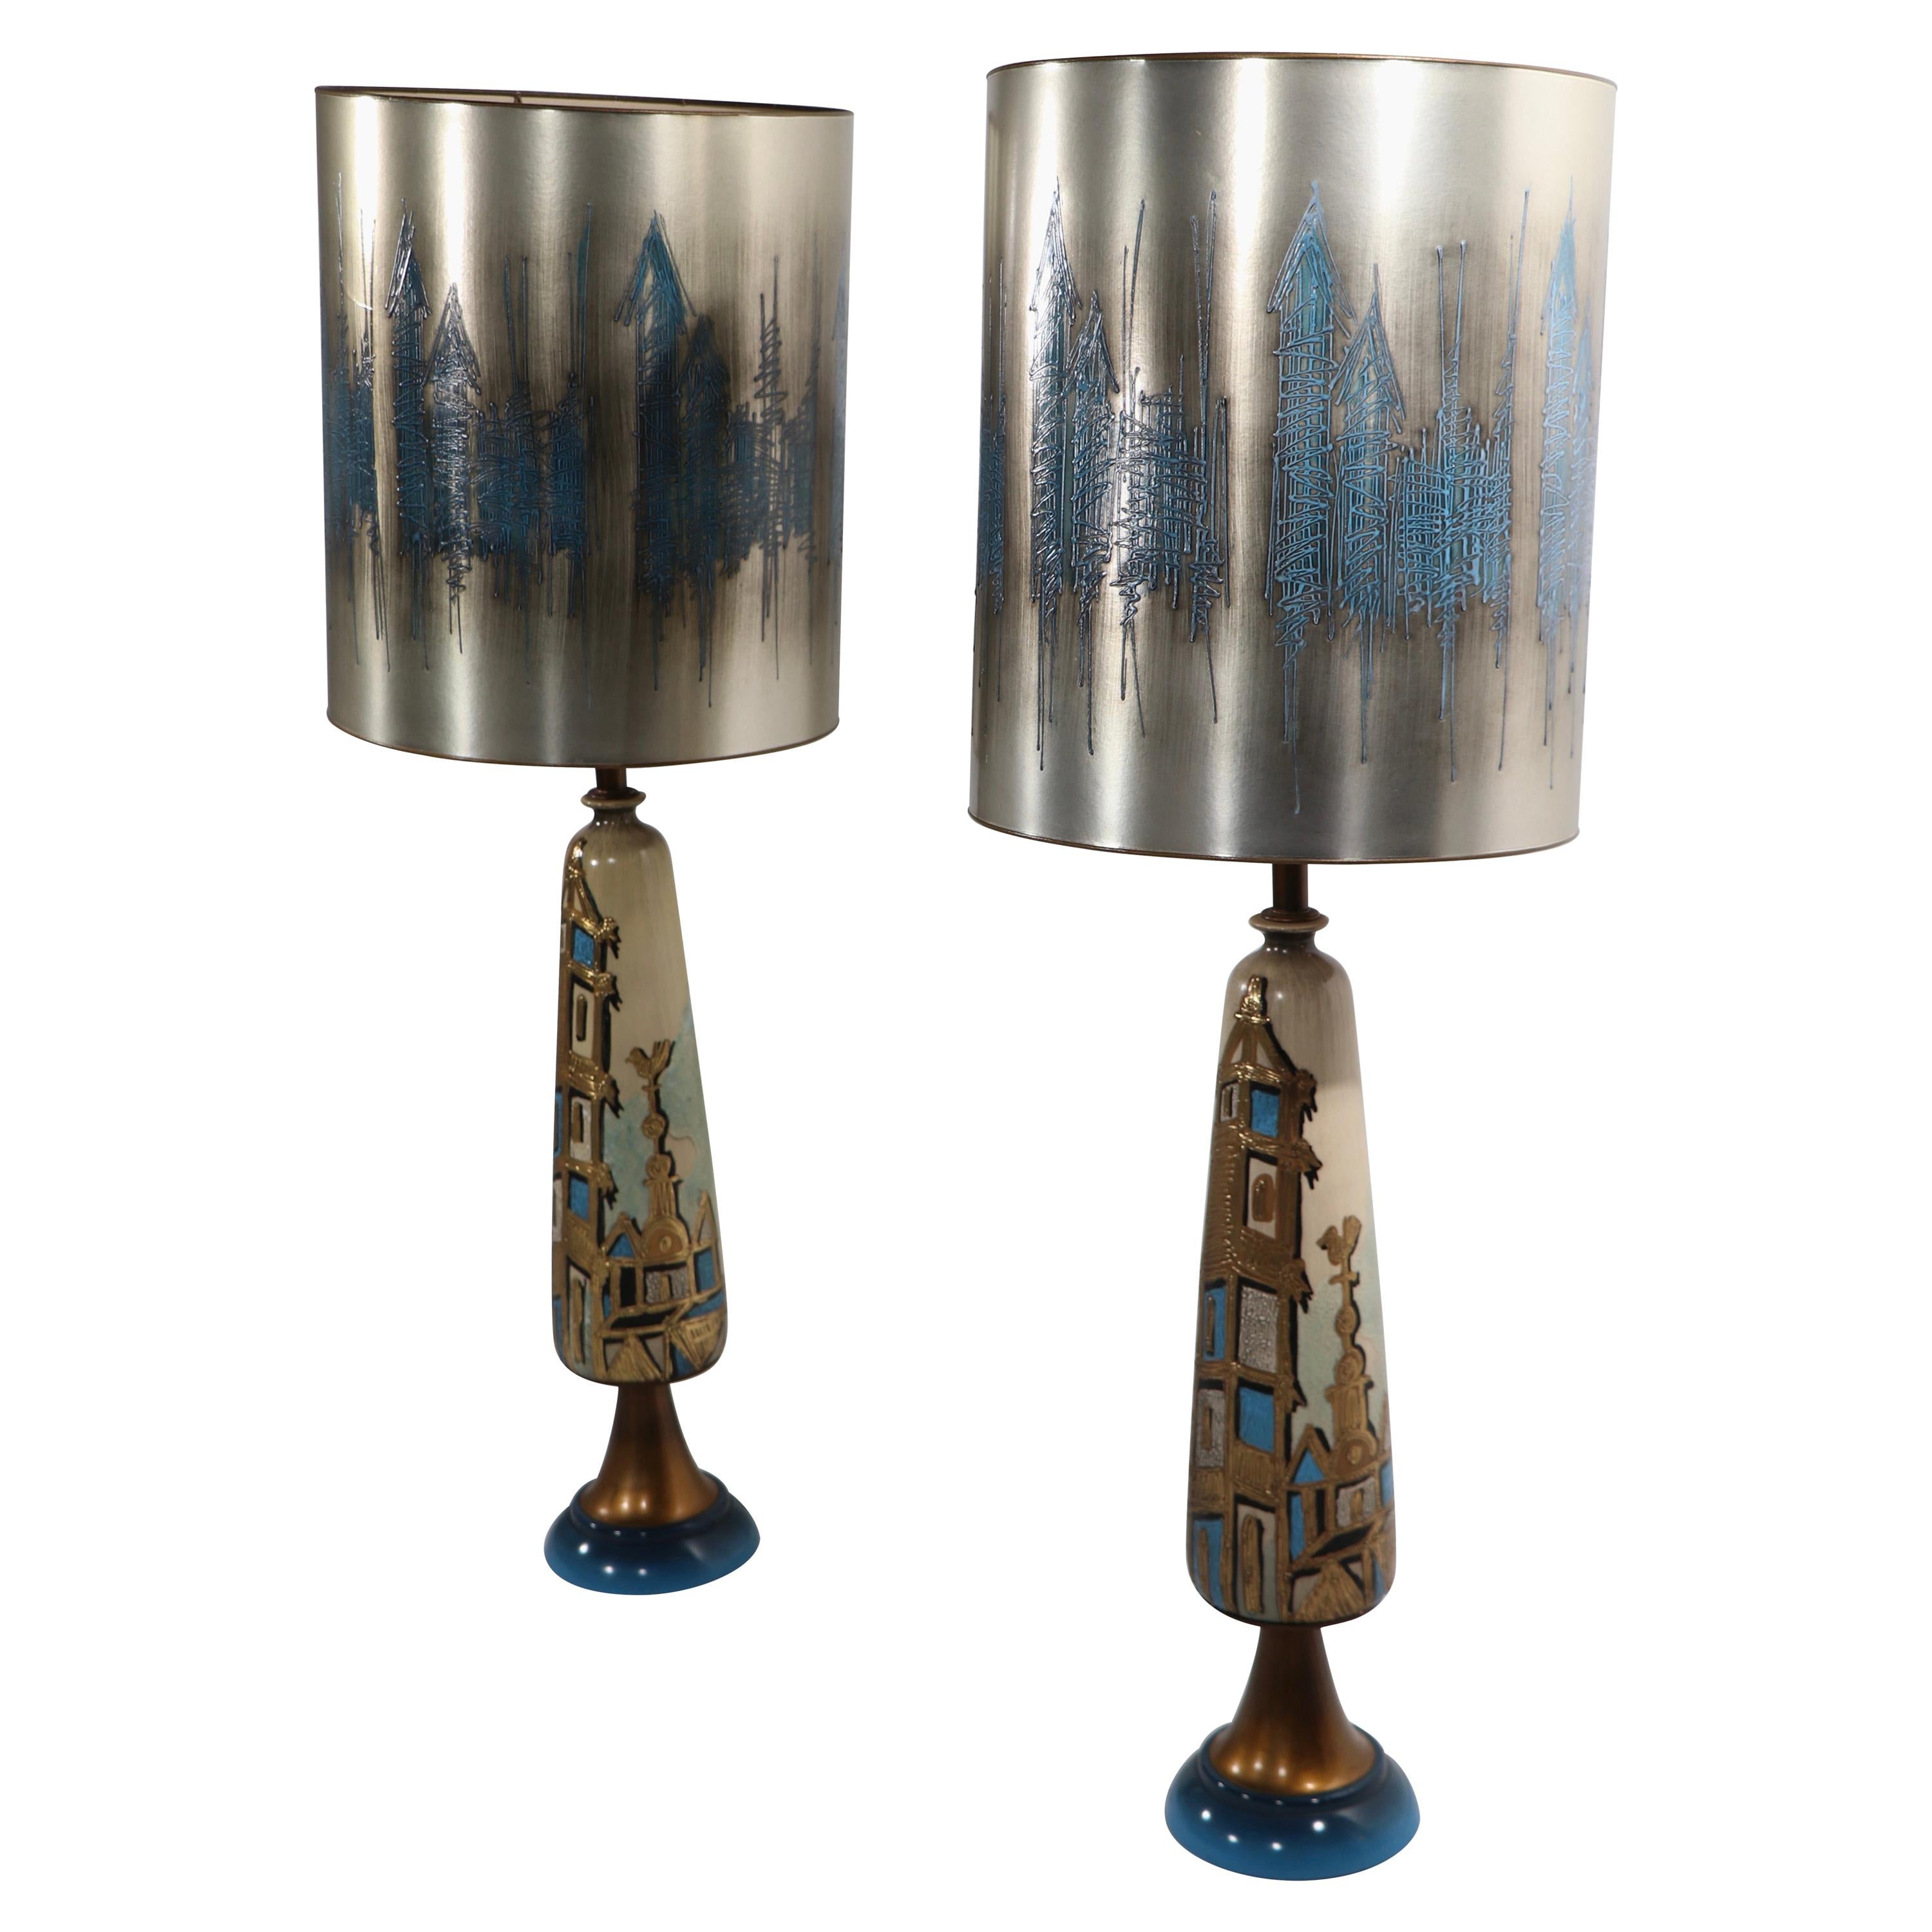 Pr. Brutalist Table Lamps with Original Silver Finish Shades after James Mont